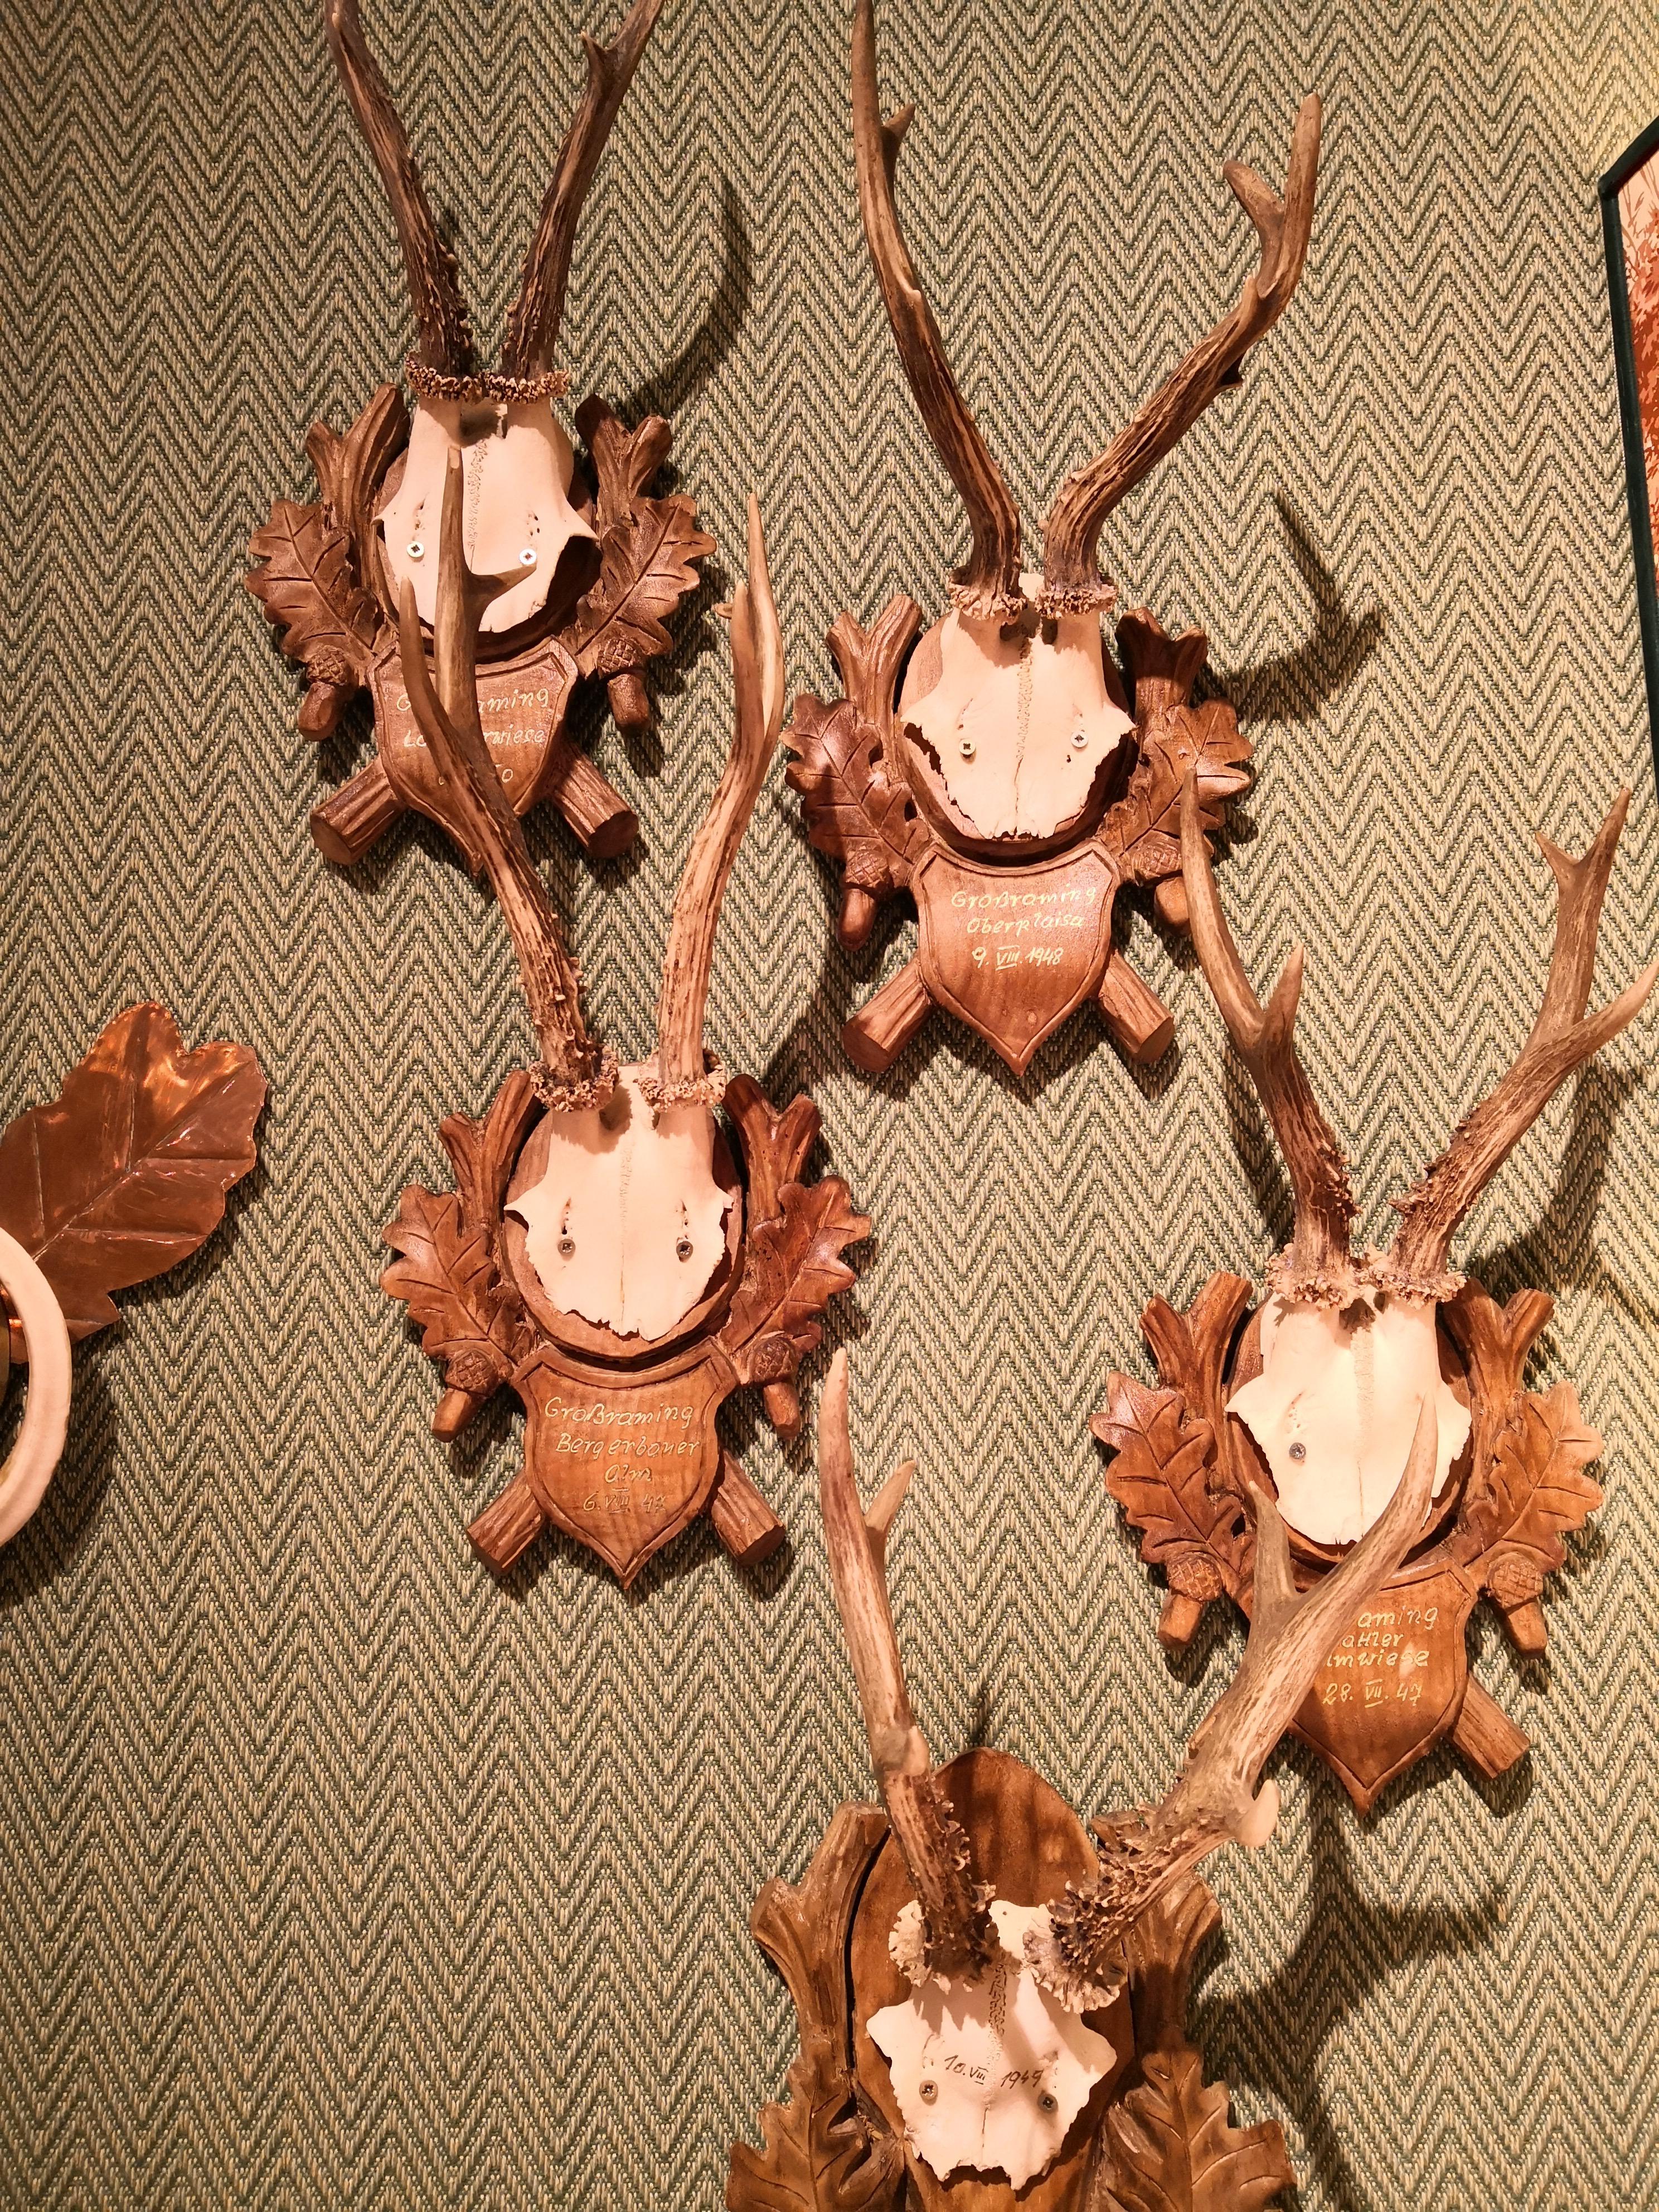 Set of six hand-carved hunting plaques with deer trophies. Wooden plaques hand-engraved from wood with oaks and oak leaves in the traditional style of Black Forest.
Each plaque is signed by hand Grossraming, which is a hunting area in Austria. Each